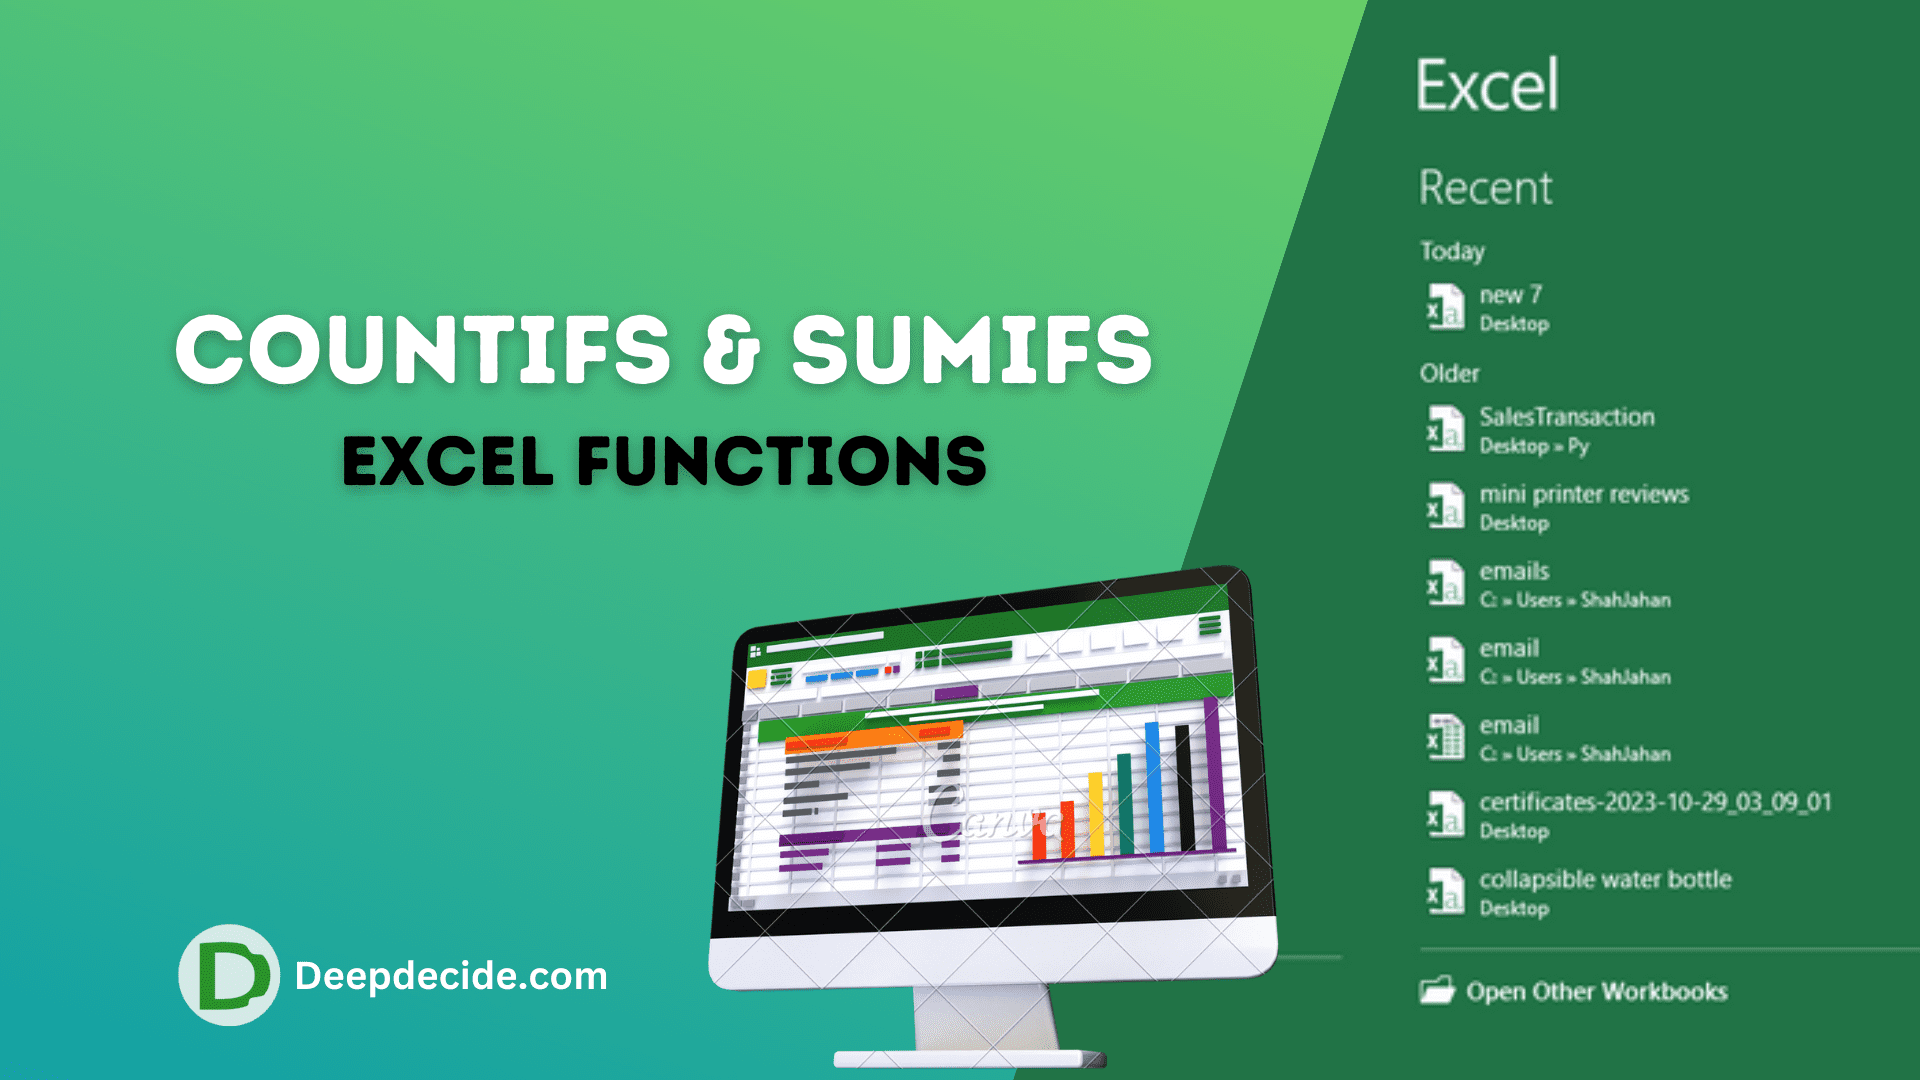 COUNTIFS and SUMIFS Excel Functions Explained